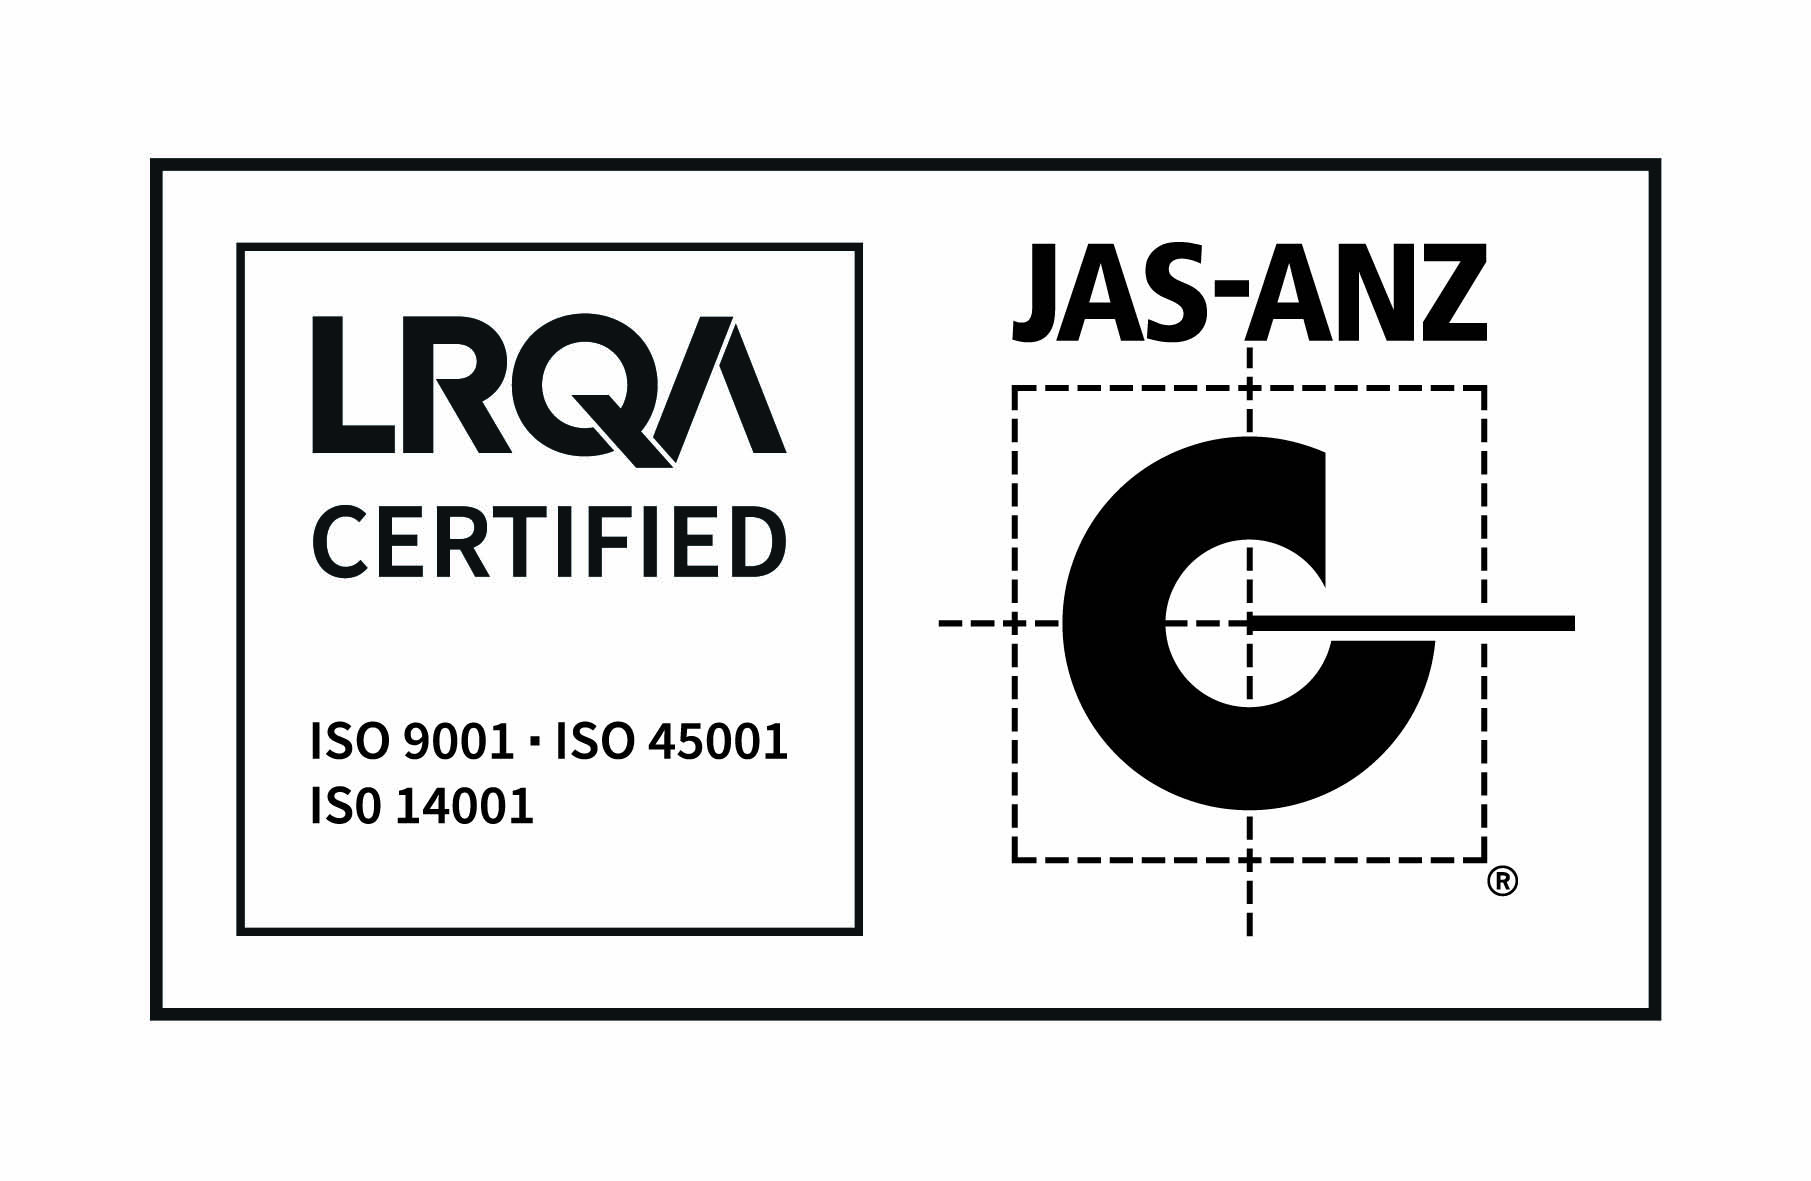 ISO 9001 and ISO 14001 Certified